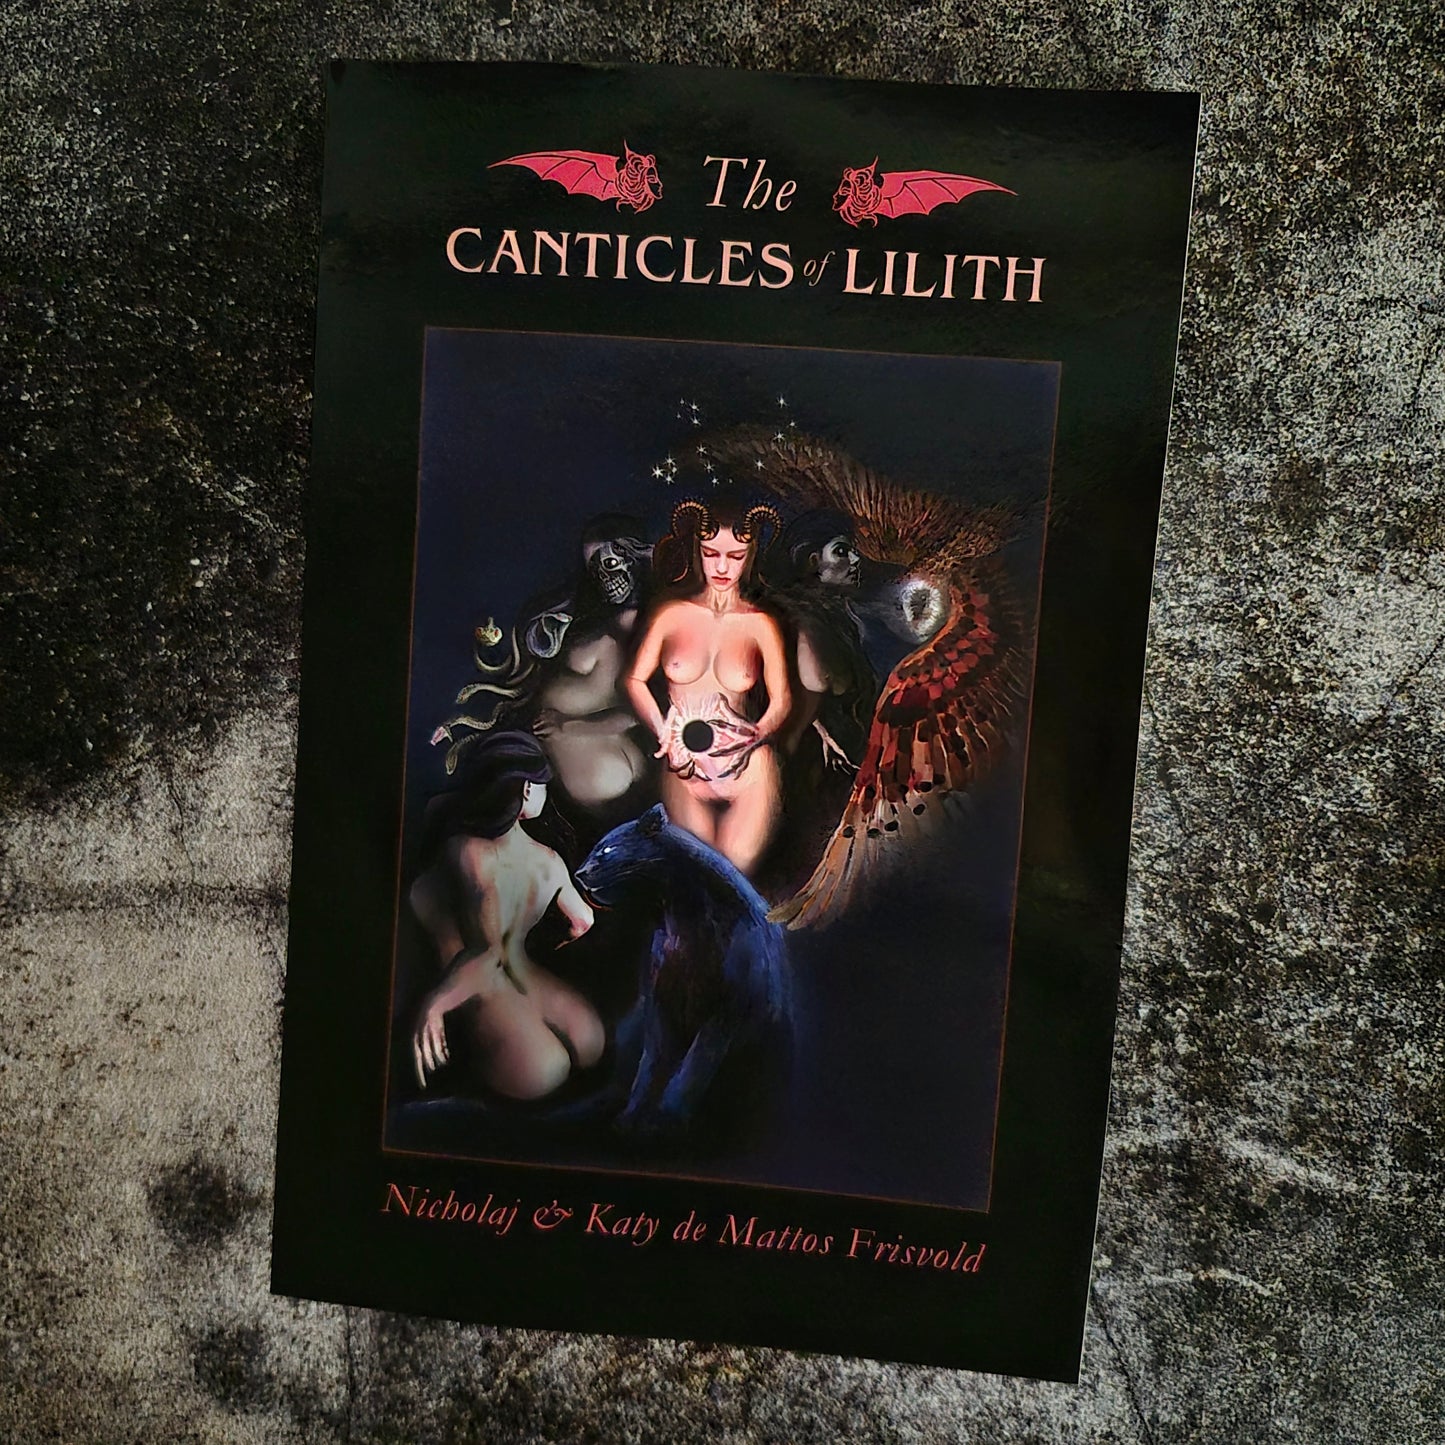 The Canticles of Lilith